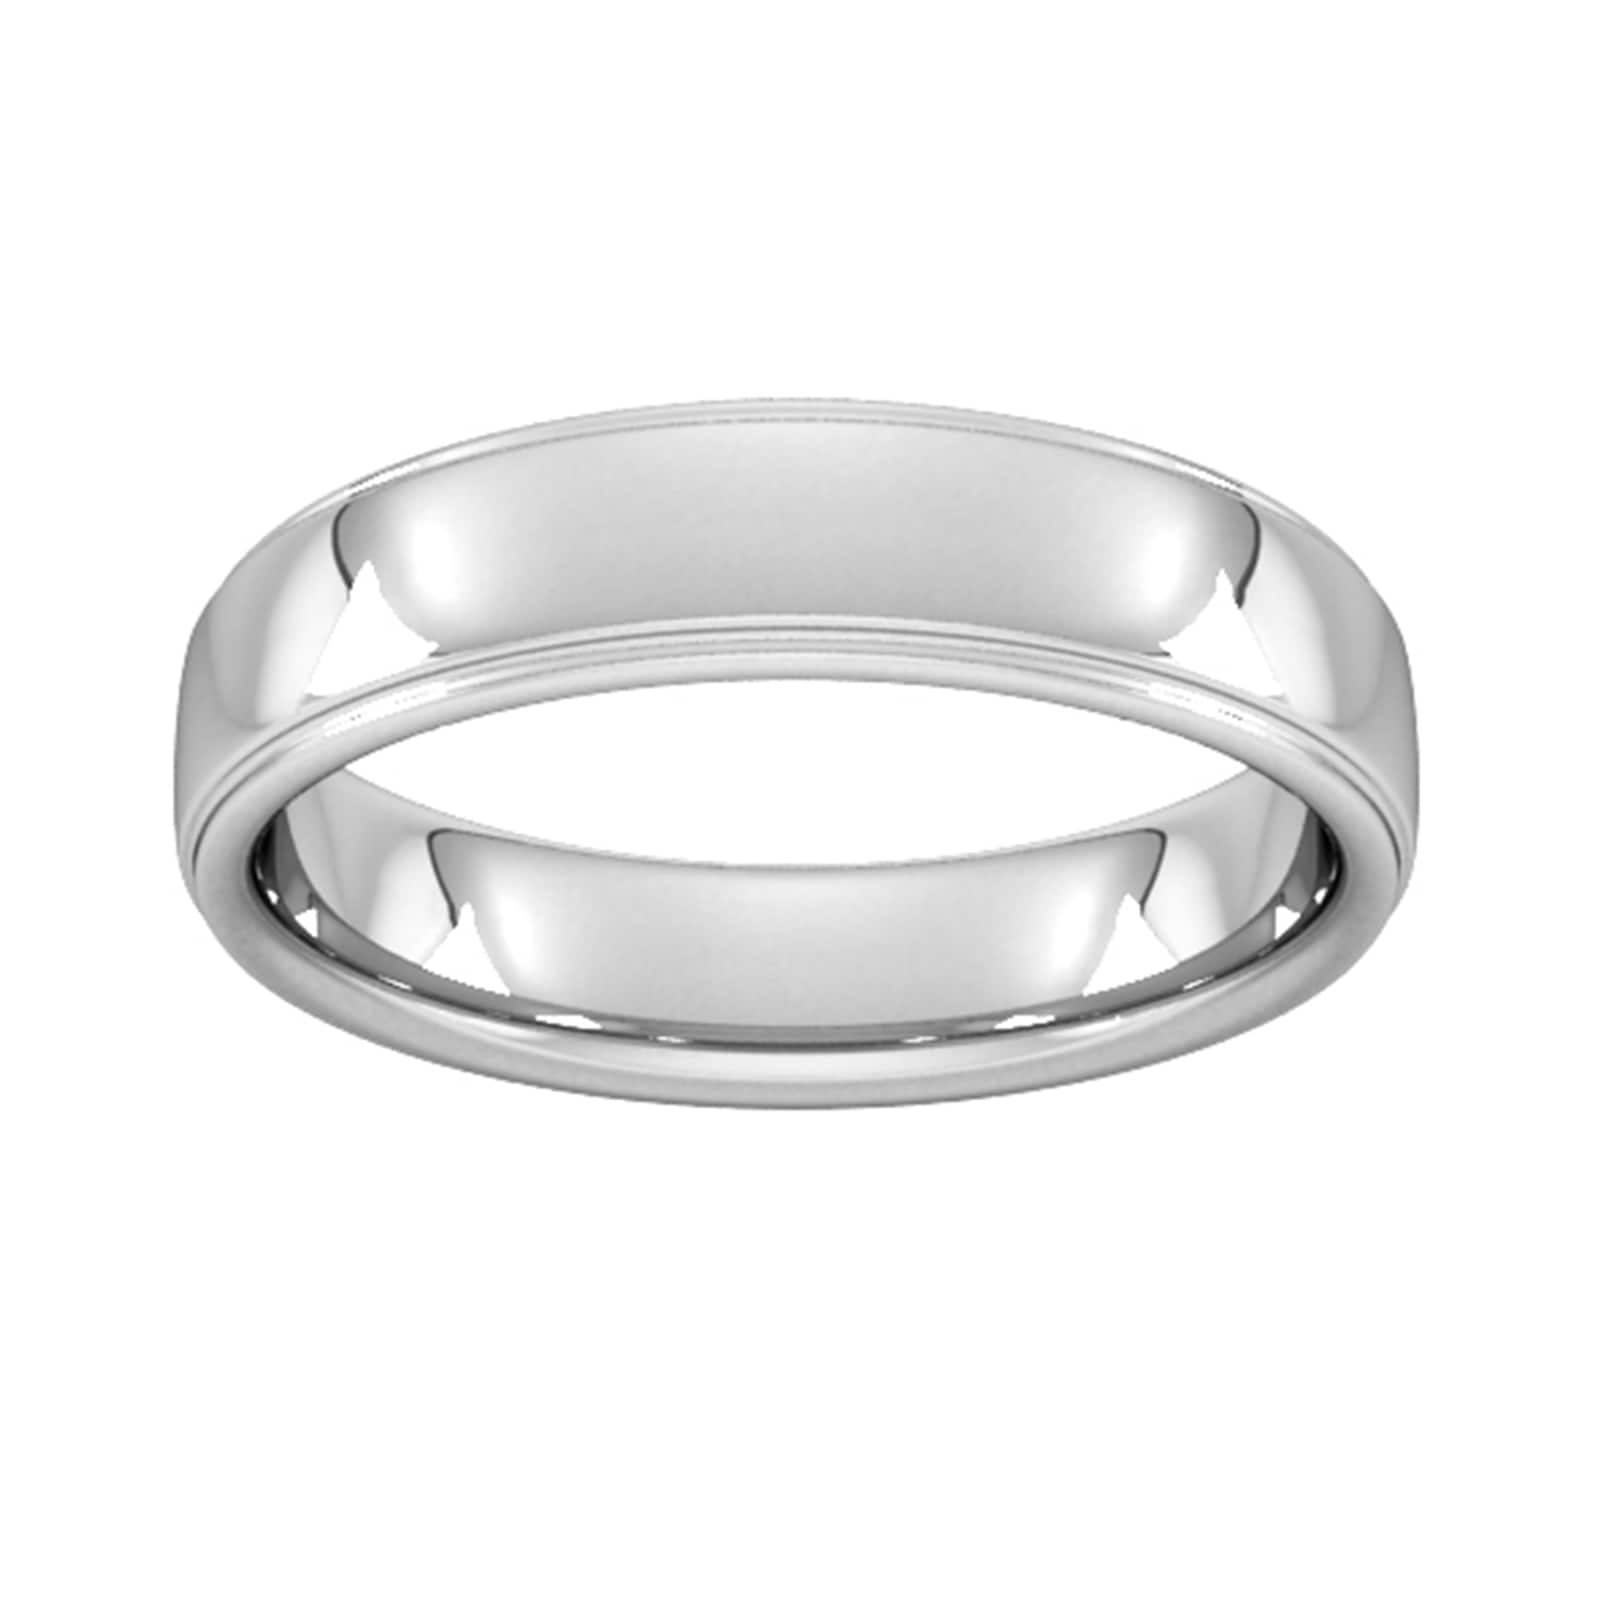 5mm Slight Court Heavy Polished Finish With Grooves Wedding Ring In Platinum - Ring Size V